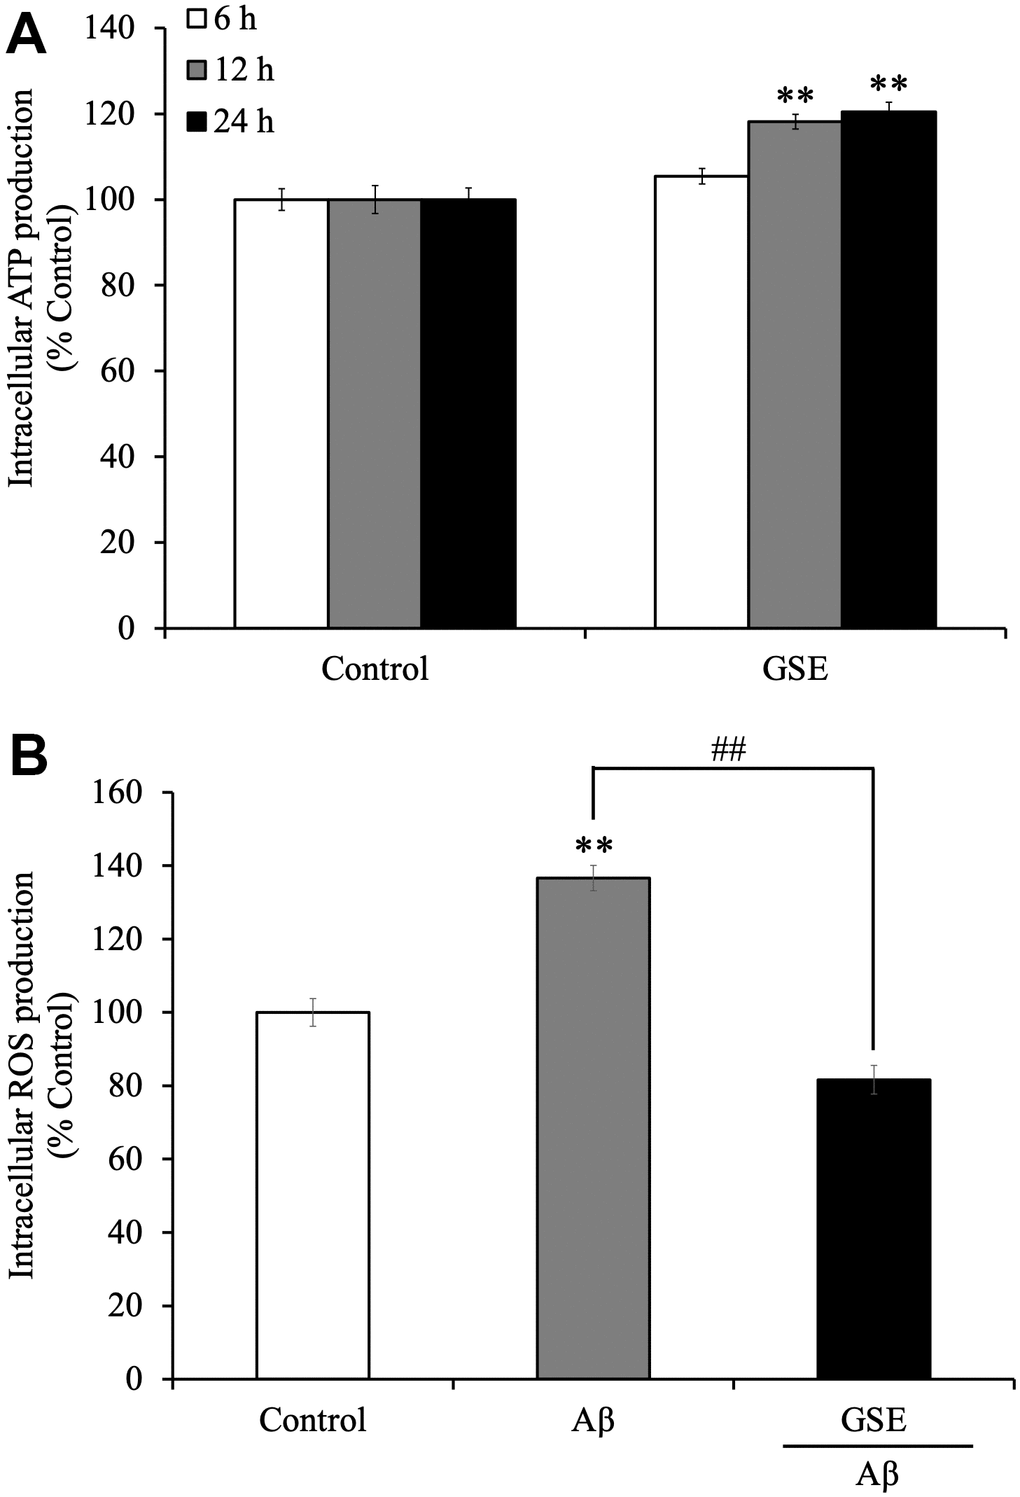 Effects of Grape skin extract (GSE) on (A) intracellular ATP and (B) reactive oxygen species (ROS) production of SH-SY5Y cells. The cells were treated with or without 20 μg/mL GSE for 6, 12, and 24 hr. After the treatment, intracellular ATP production levels were measured. And Intracellular ROS levels were detected by measuring fluorescence intensity of DCF oxidized by ROS. SH-SY5Y cells were pre-incubated with DCFH-DA for 1 h followed by treatment with growth medium or differentiation medium with or without 20 μg/mL GSE and 5 μM Aβ42 for 60 min. The fluorescence intensity was measured immediately after treatment. Data was set as % of non-treated cells (Control). Each bar represents the mean ± SEM (n = 5 independent experiments). ** P 42-treated cells by one-way ANOVA analysis.